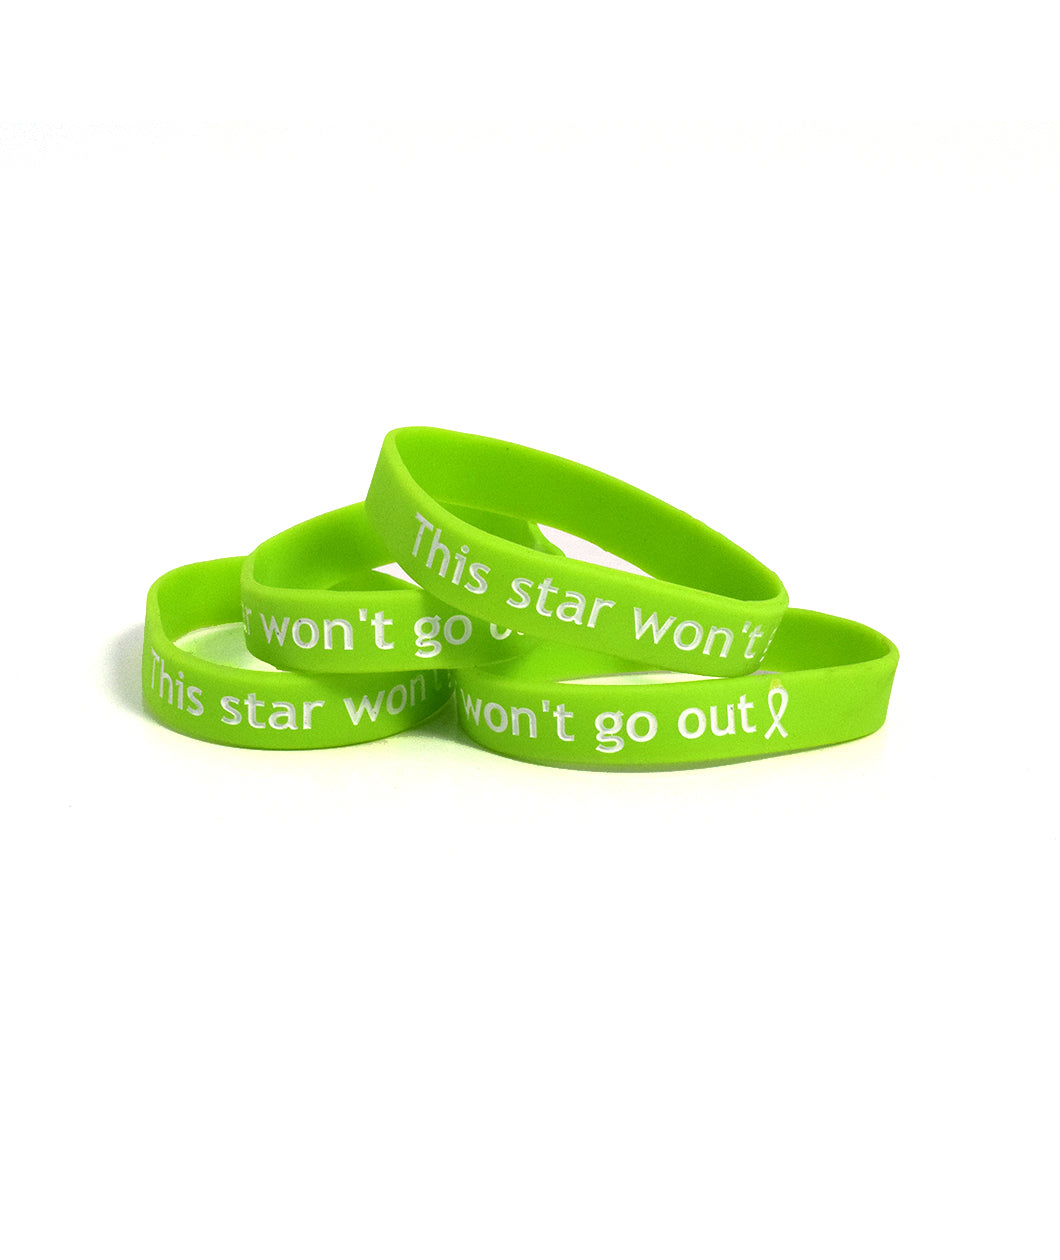 Four lime green bracelets that say “This star won’t go out” in white sans serif font followed by a ribbon - from This Star Won’t Go Out